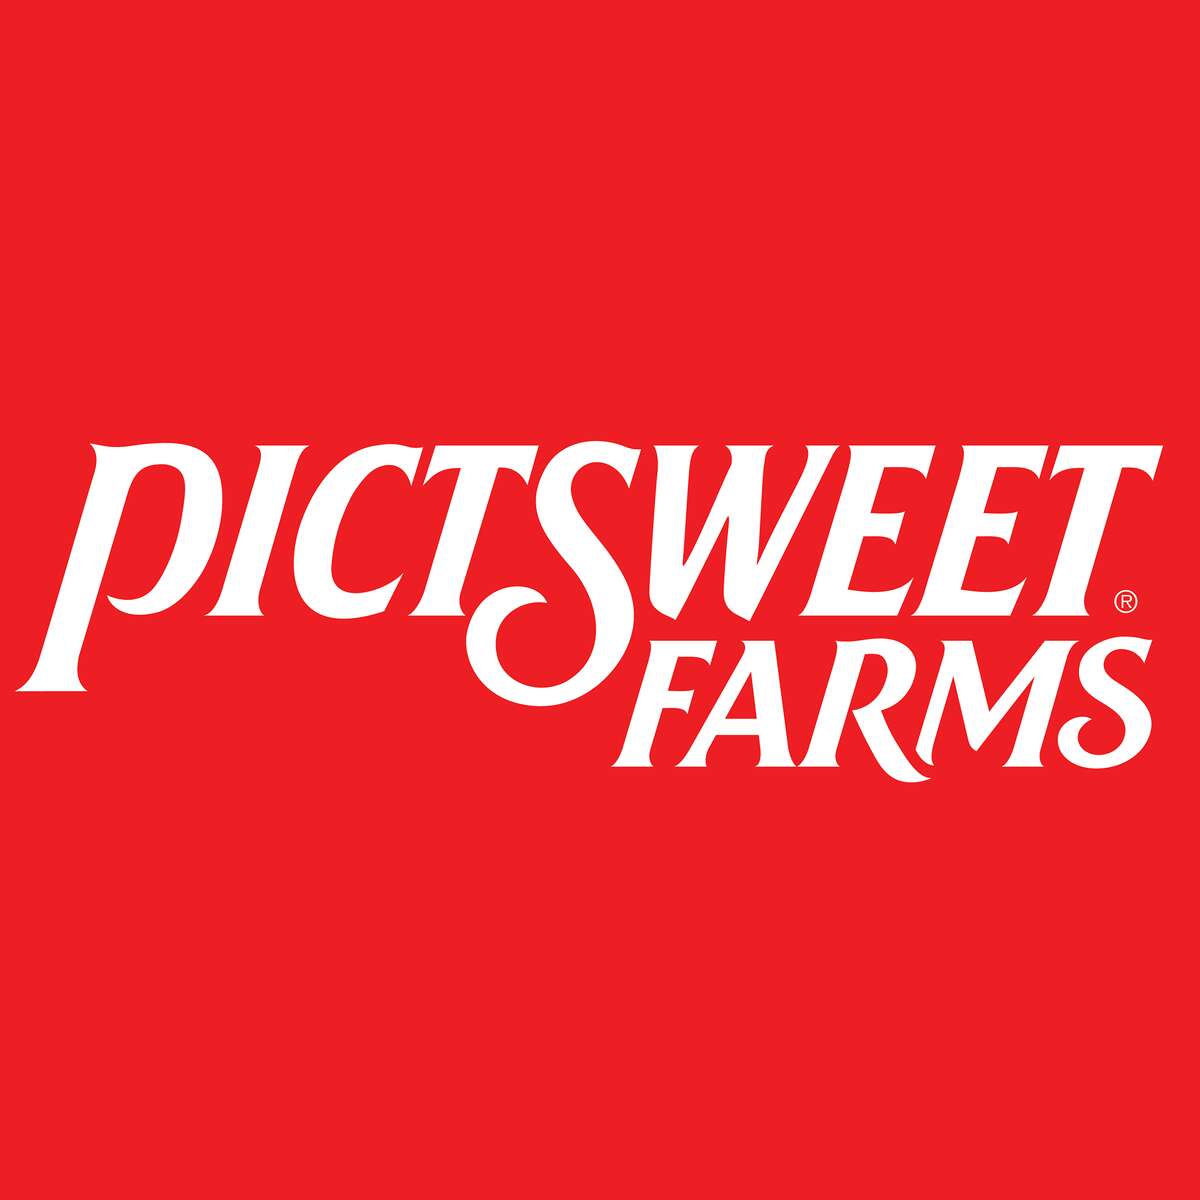 The Pictsweet Co., a Tennessee-based frozen foods company, has filed notice of its intention to permanently close its facility in San Antonio by mid-March.